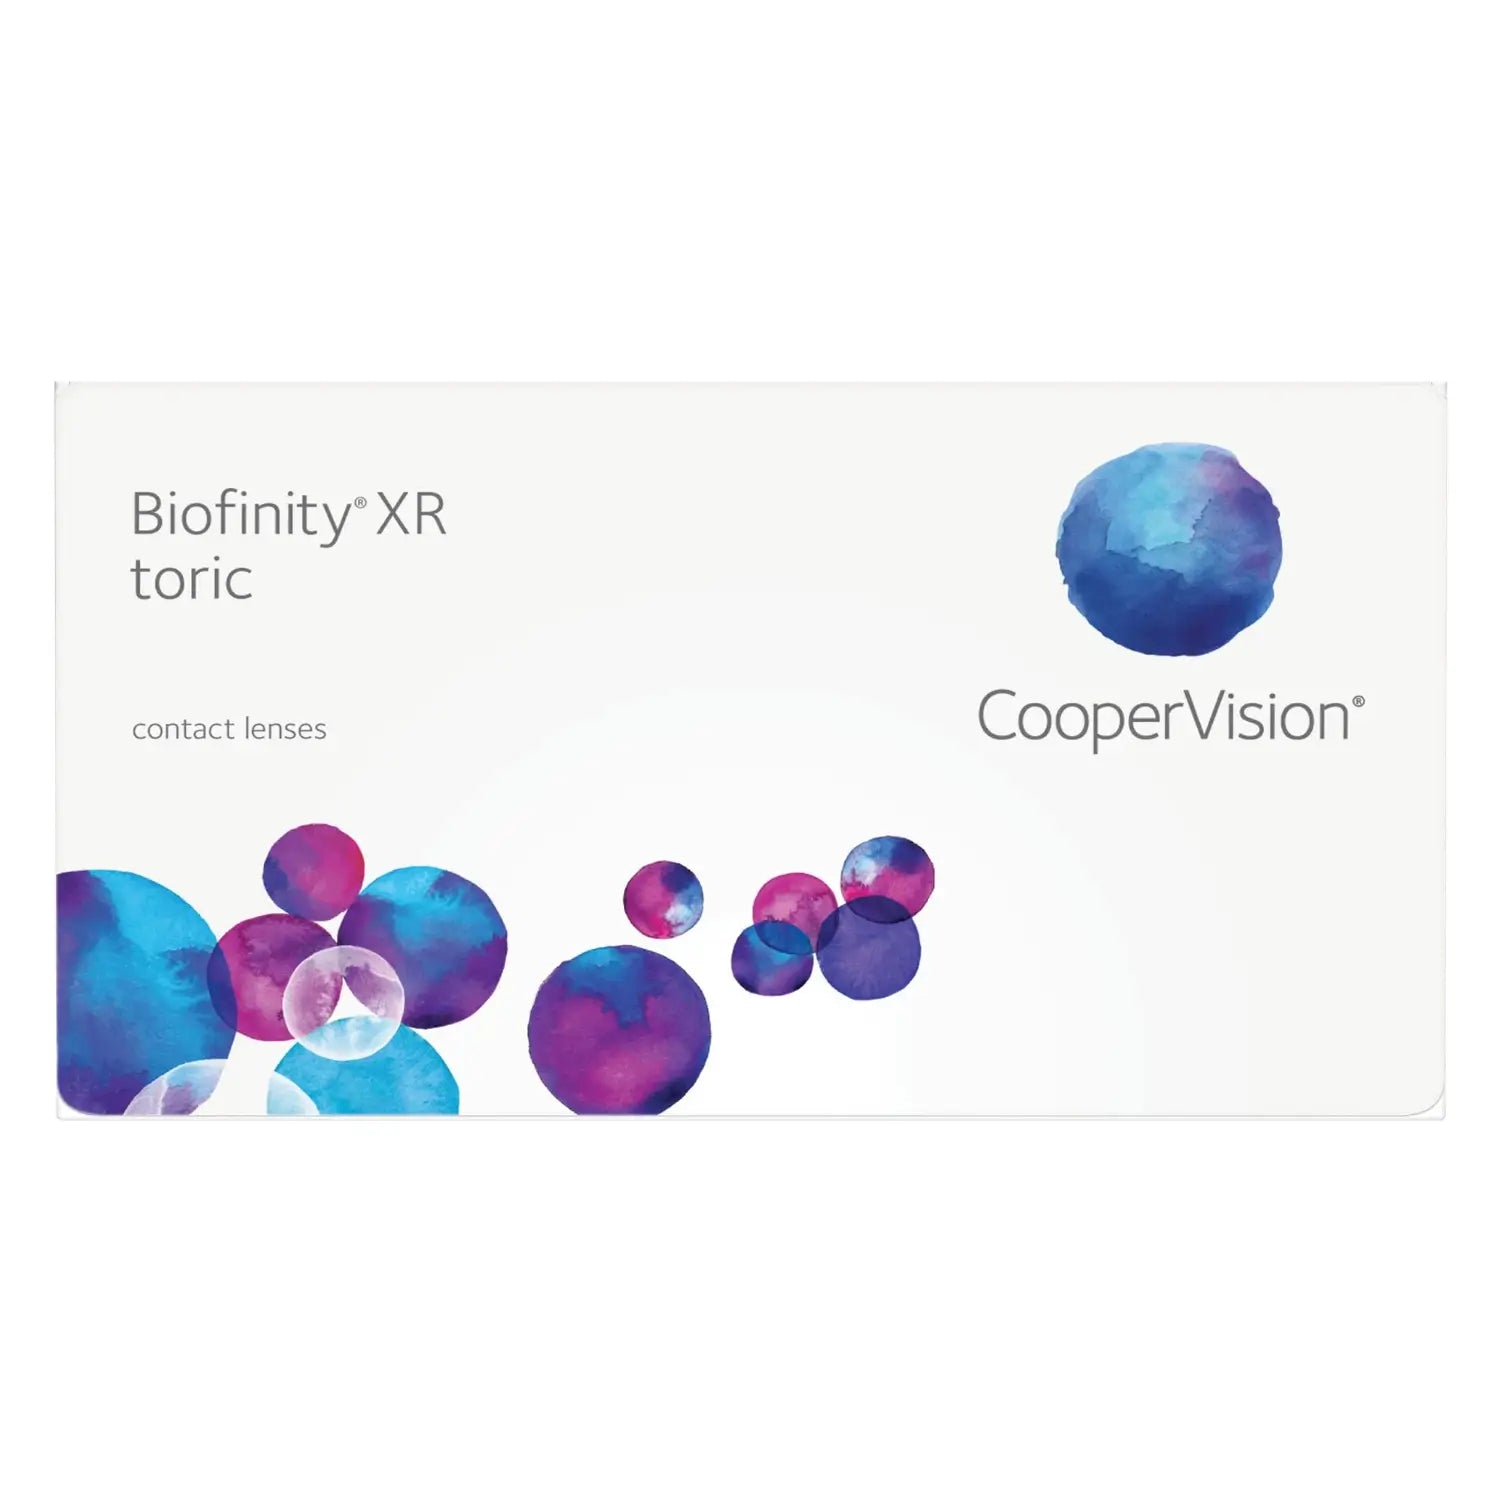 Certified Biofinity monthly Contact Lenses by Cooper Vision on sale online at The Optical Co at the best prices